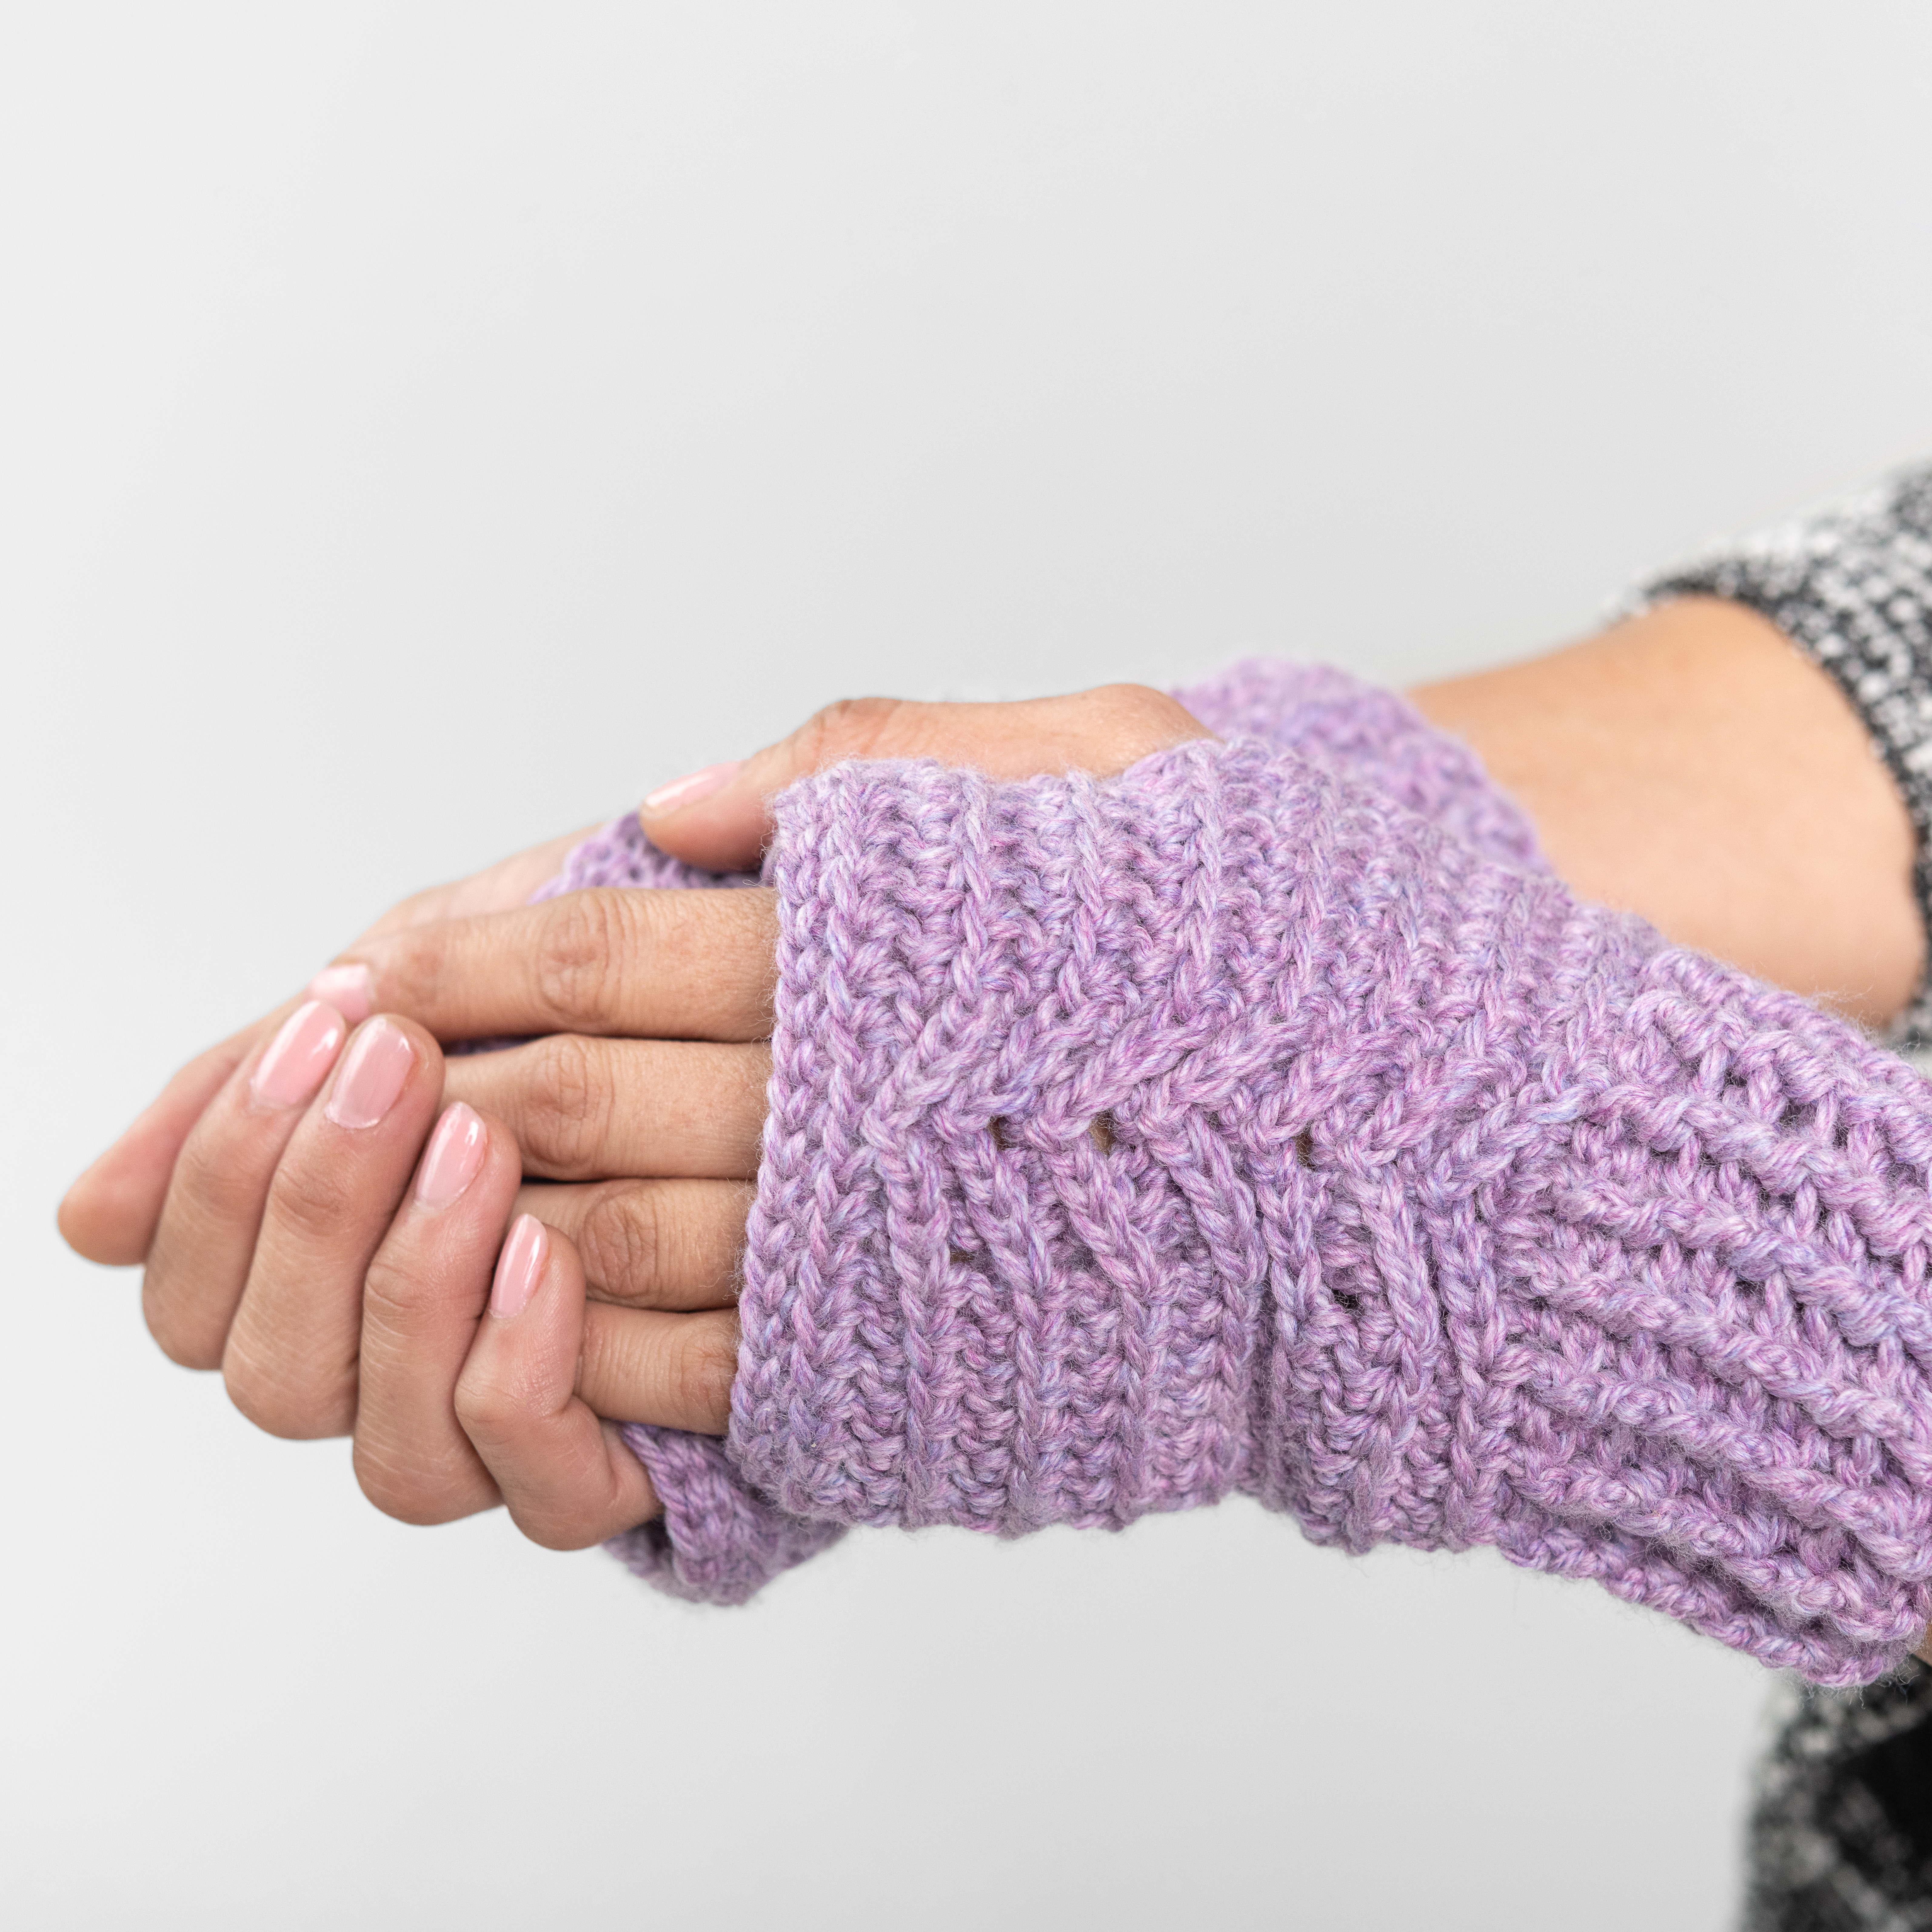 Read more about the article Mountain Peaks Mitts – crochet pattern